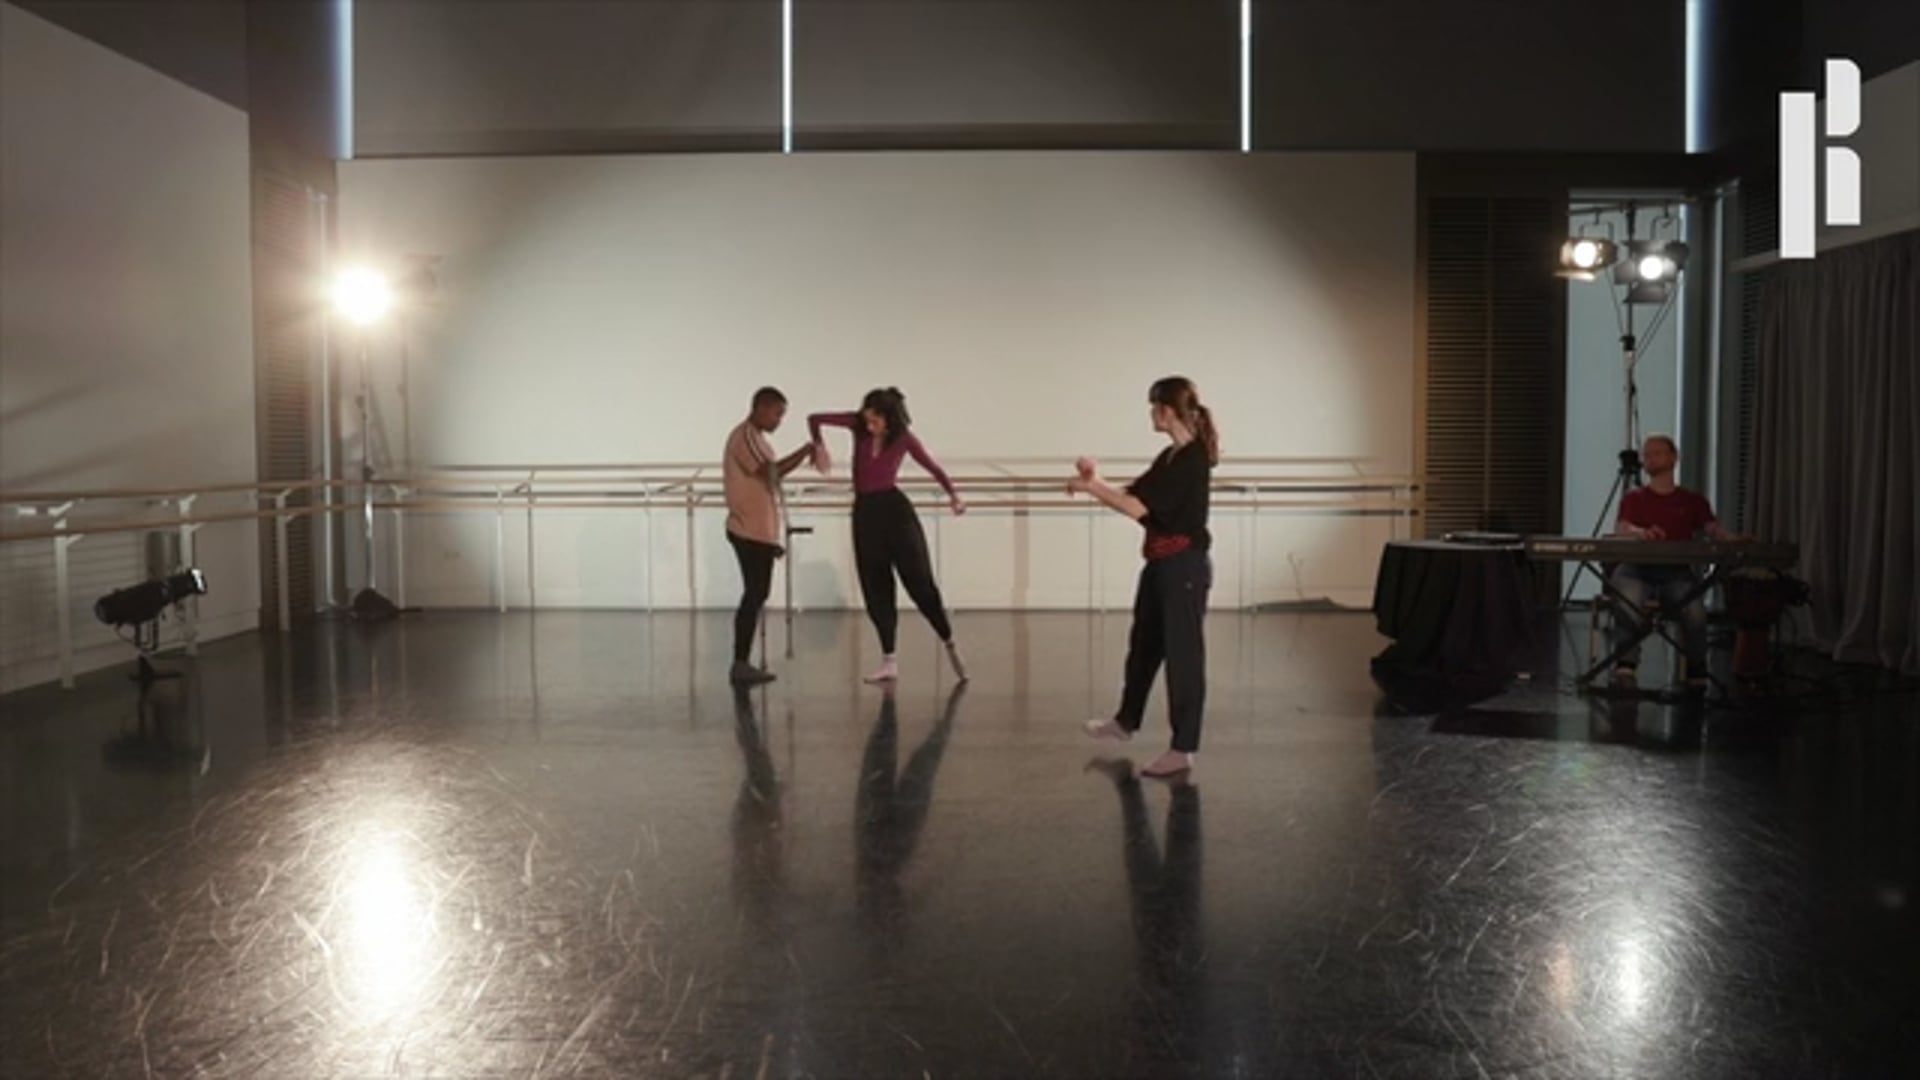 A group of dancers in an empty dance studio.